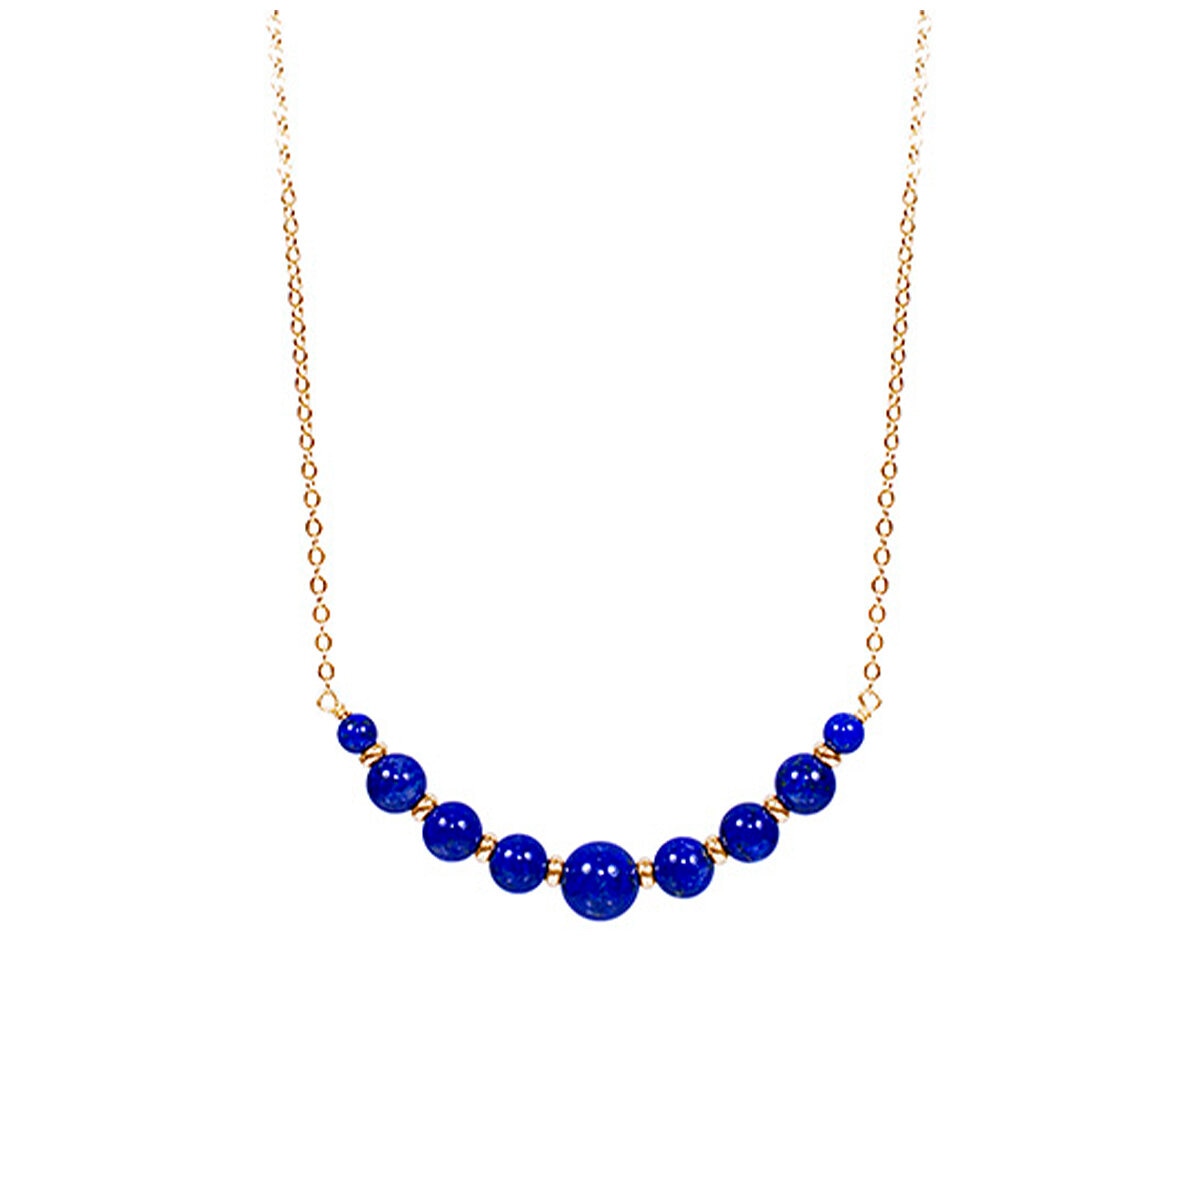 1063895 14KT Yellow Gold Graduated Lapis Bead Necklace/